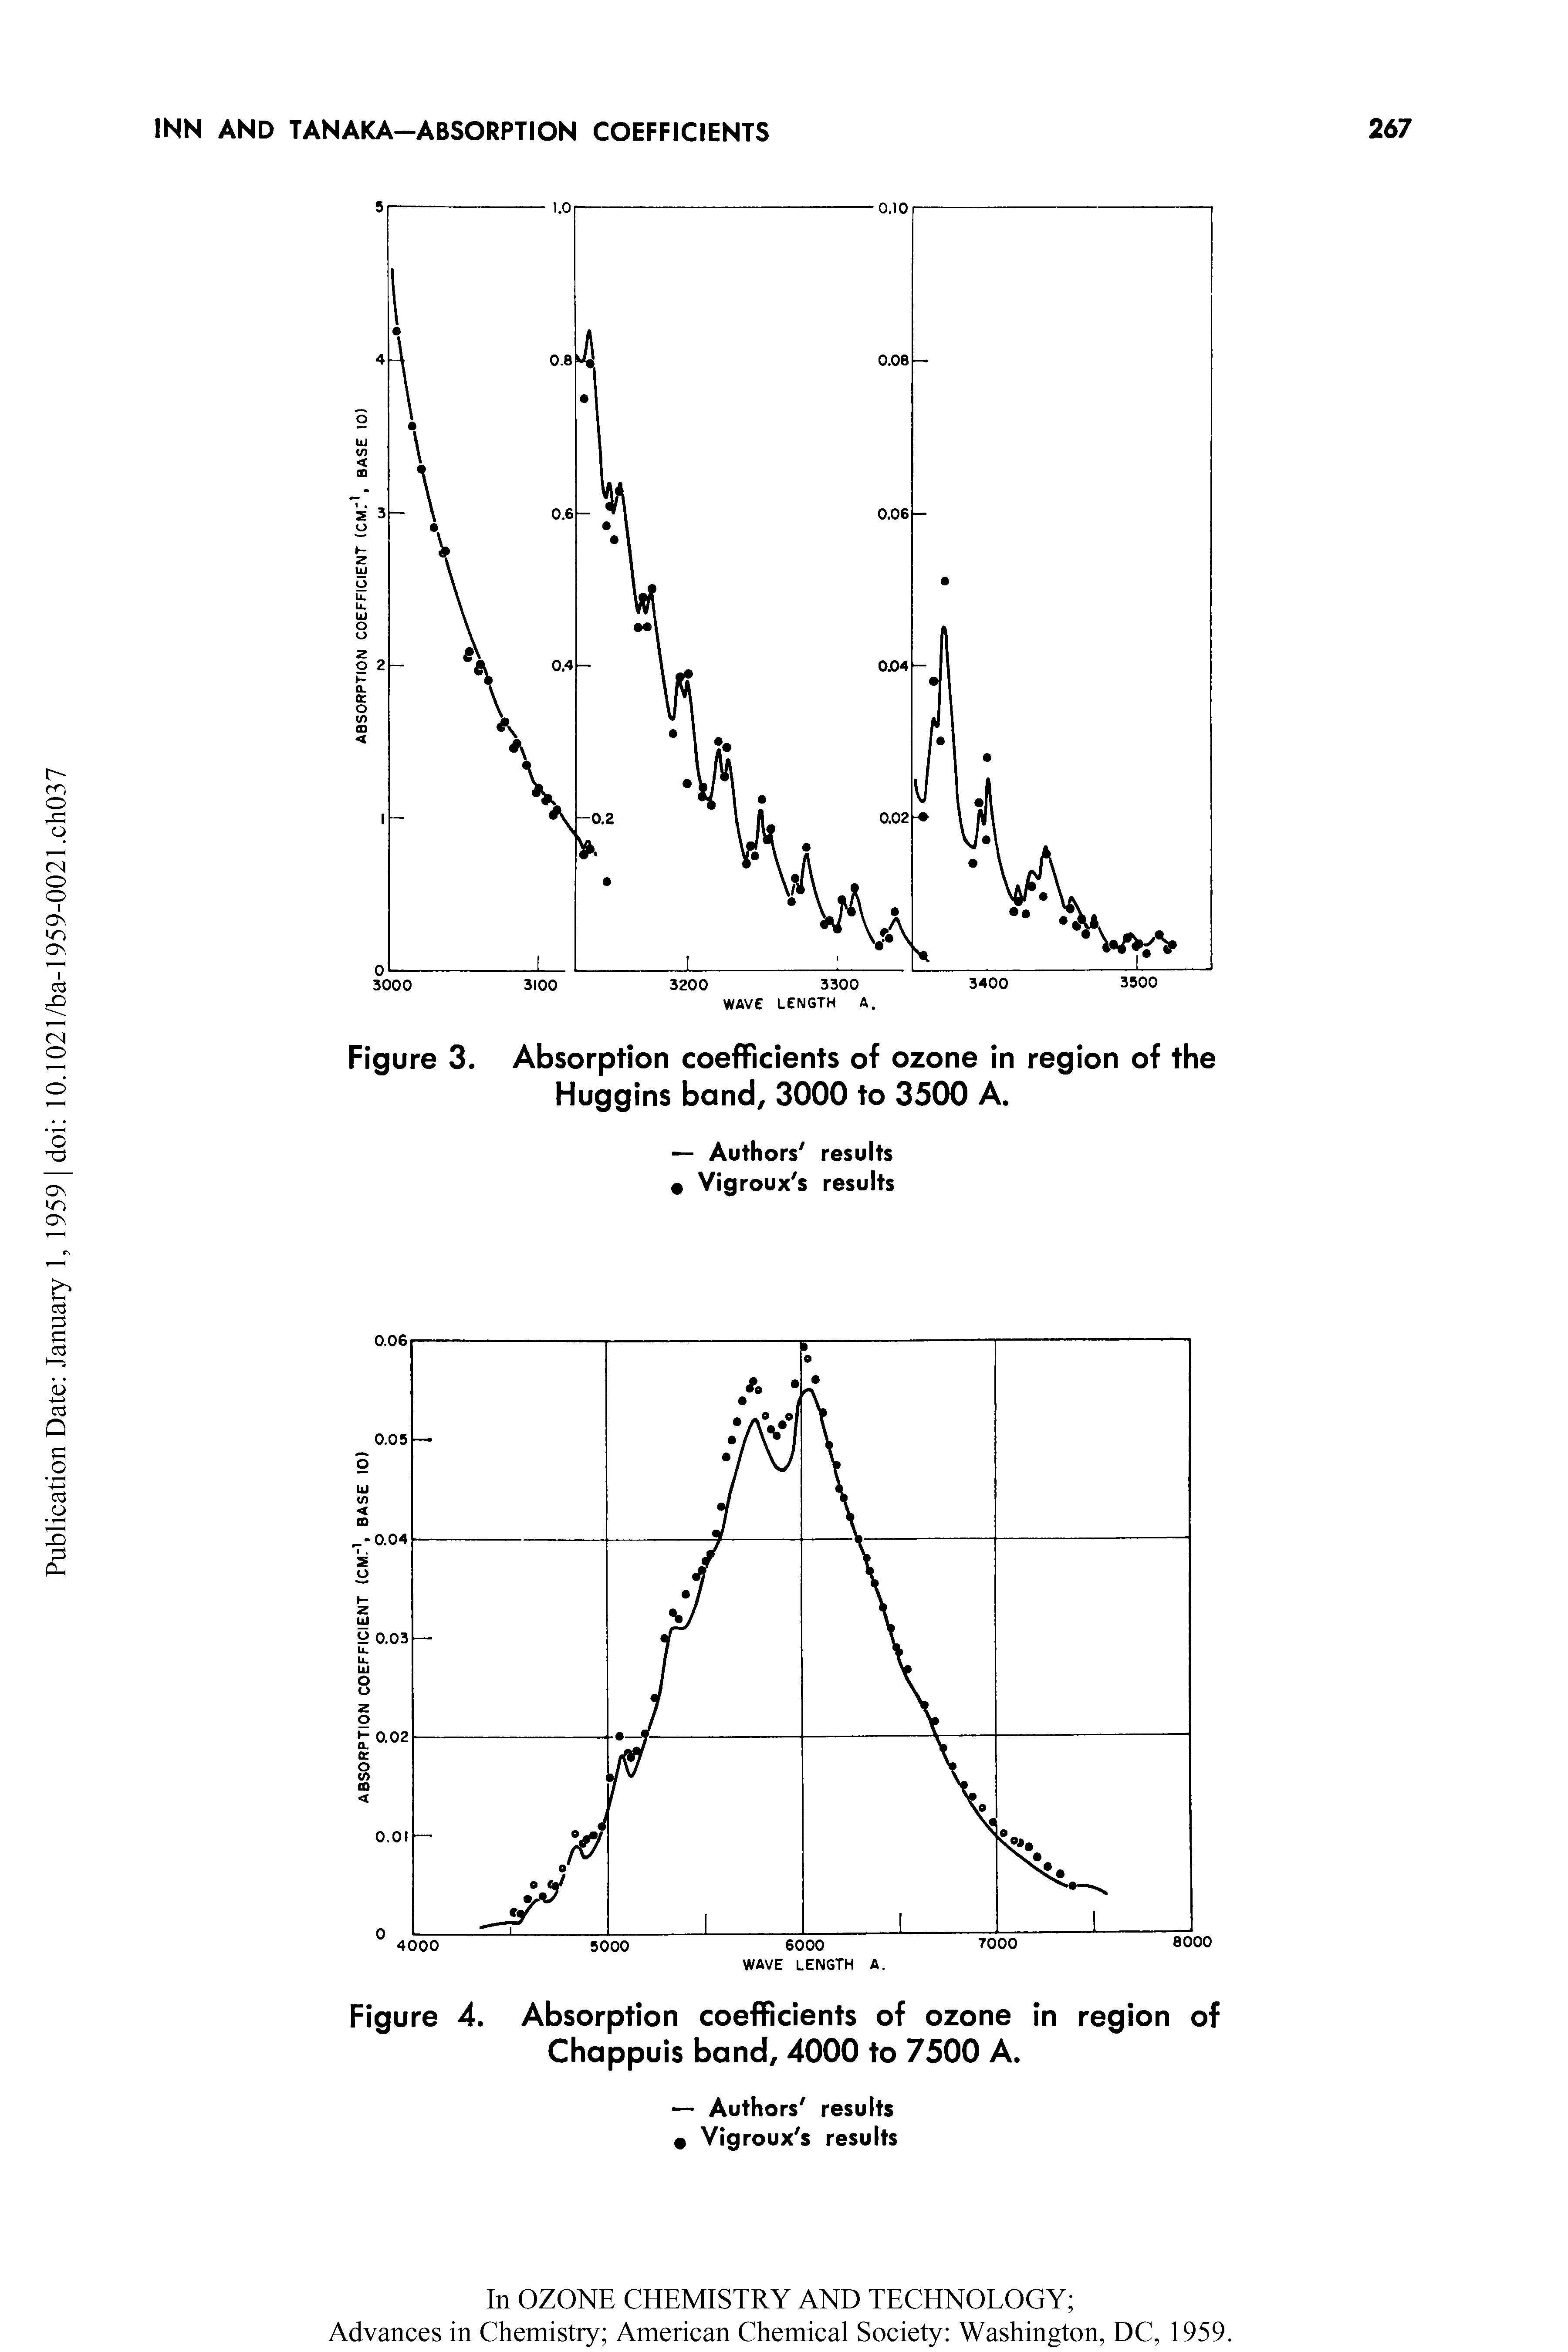 Figure 4. Absorption coefficients of ozone in region of Chappuis band, 4000 to 7500 A.